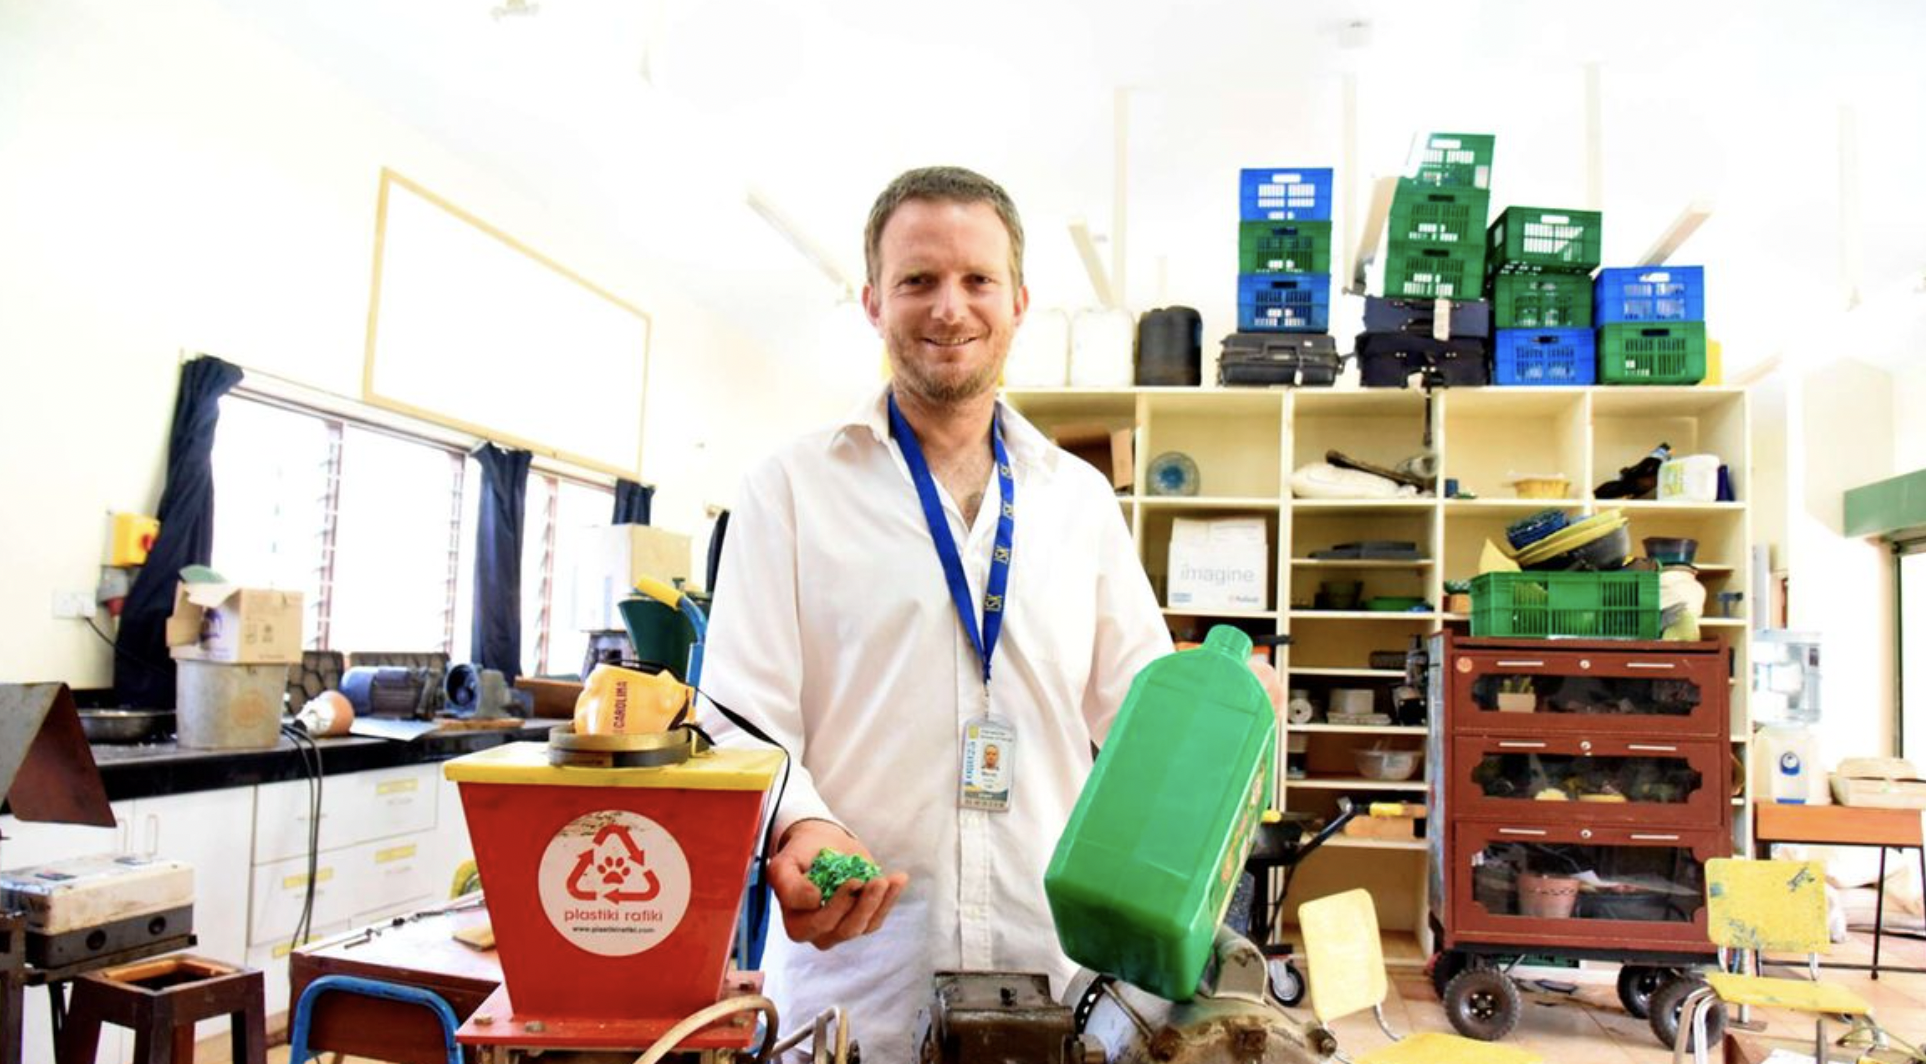 “Recycling plastics for reuse earns students a tidy sum” – BD